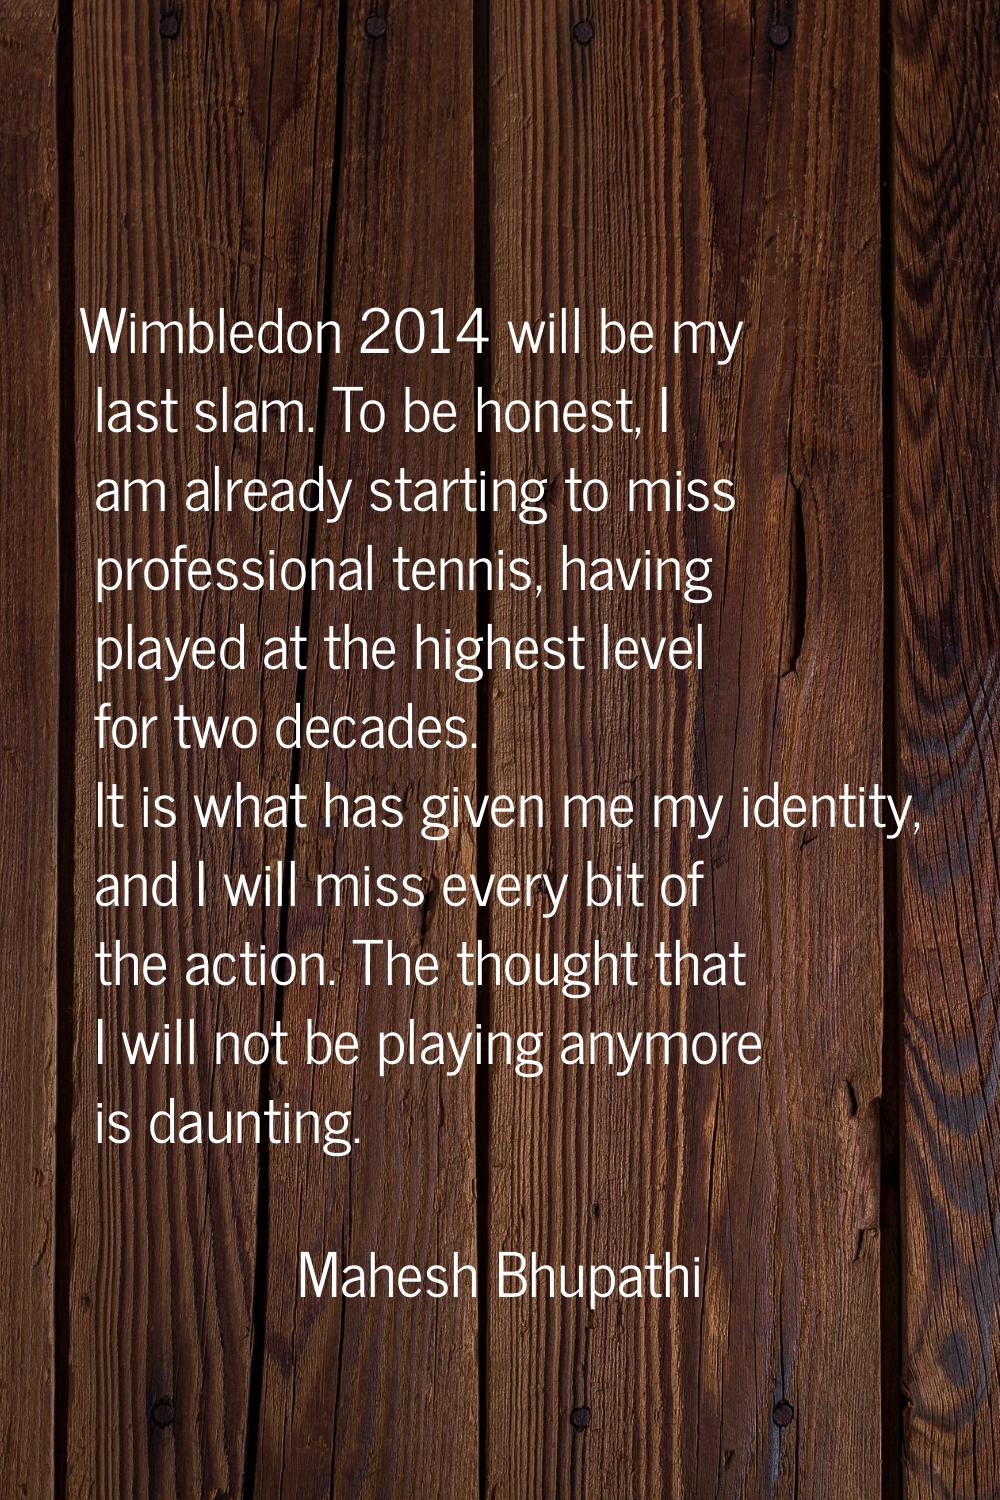 Wimbledon 2014 will be my last slam. To be honest, I am already starting to miss professional tenni